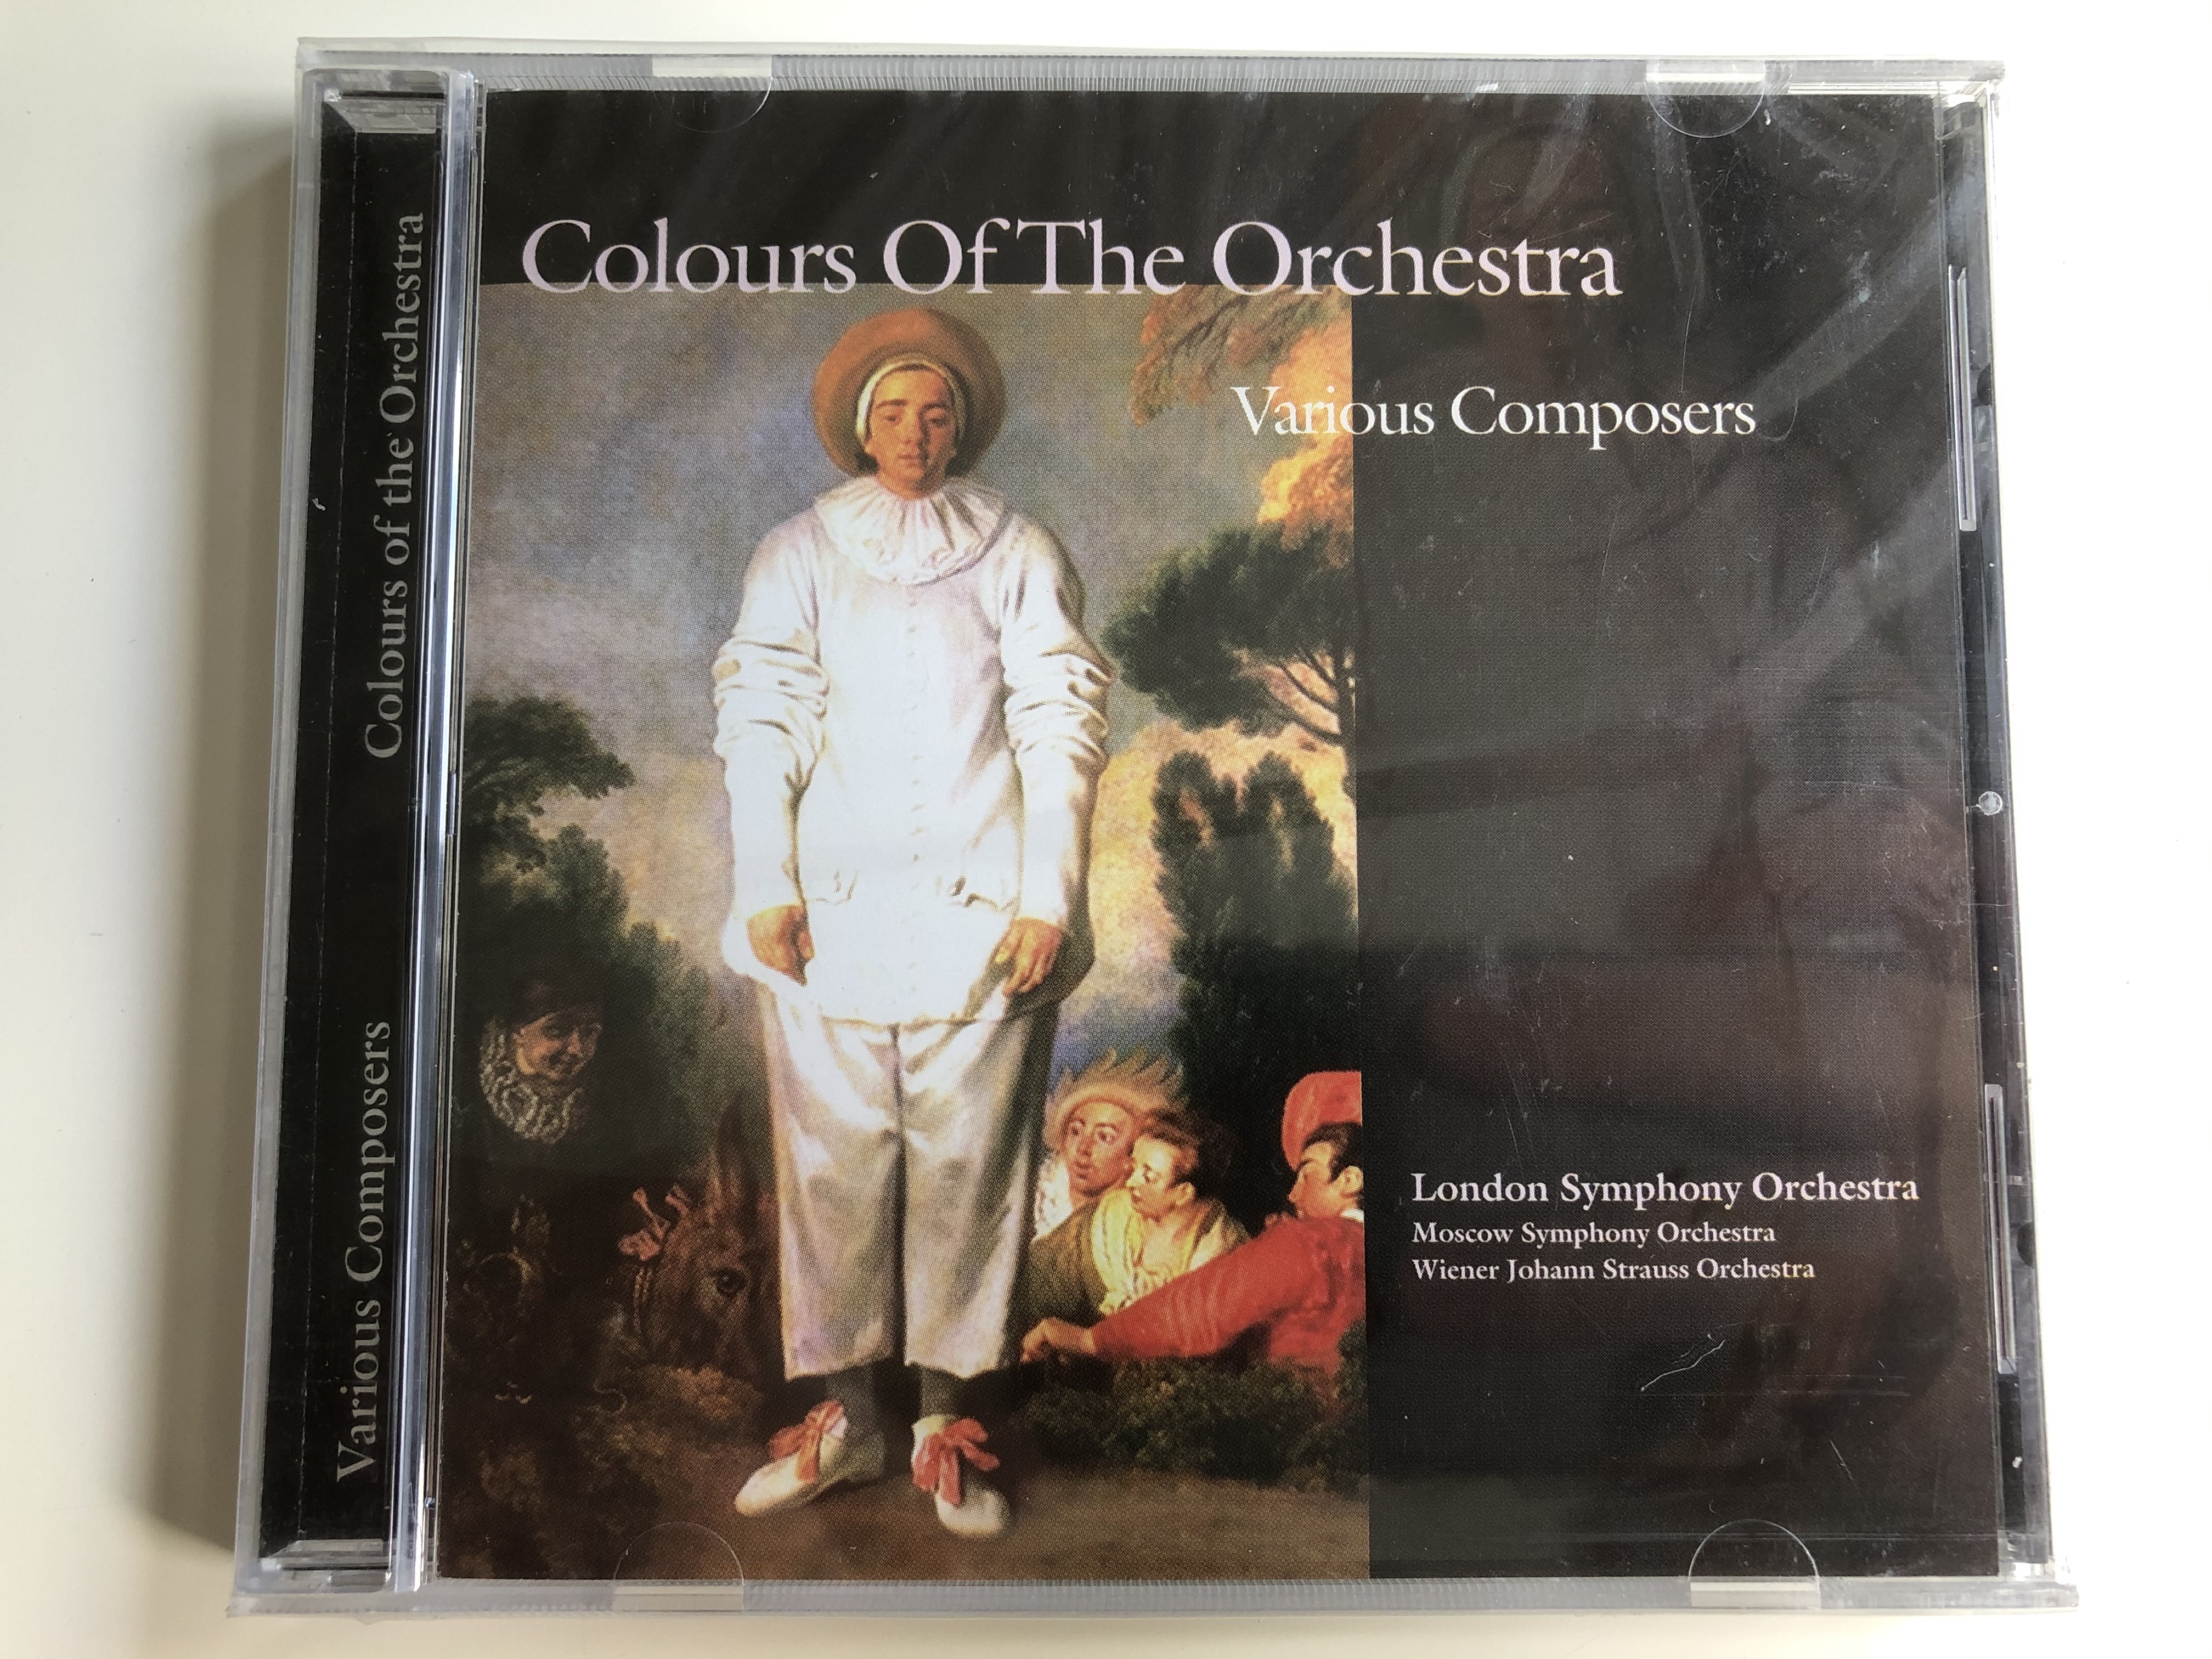 colours-of-the-orchestra-various-composers-london-symphony-orchestra-moscow-symphony-orchestra-wiener-johann-strauss-orchestra-a-play-classics-audio-cd-1998-9030-2-1-.jpg